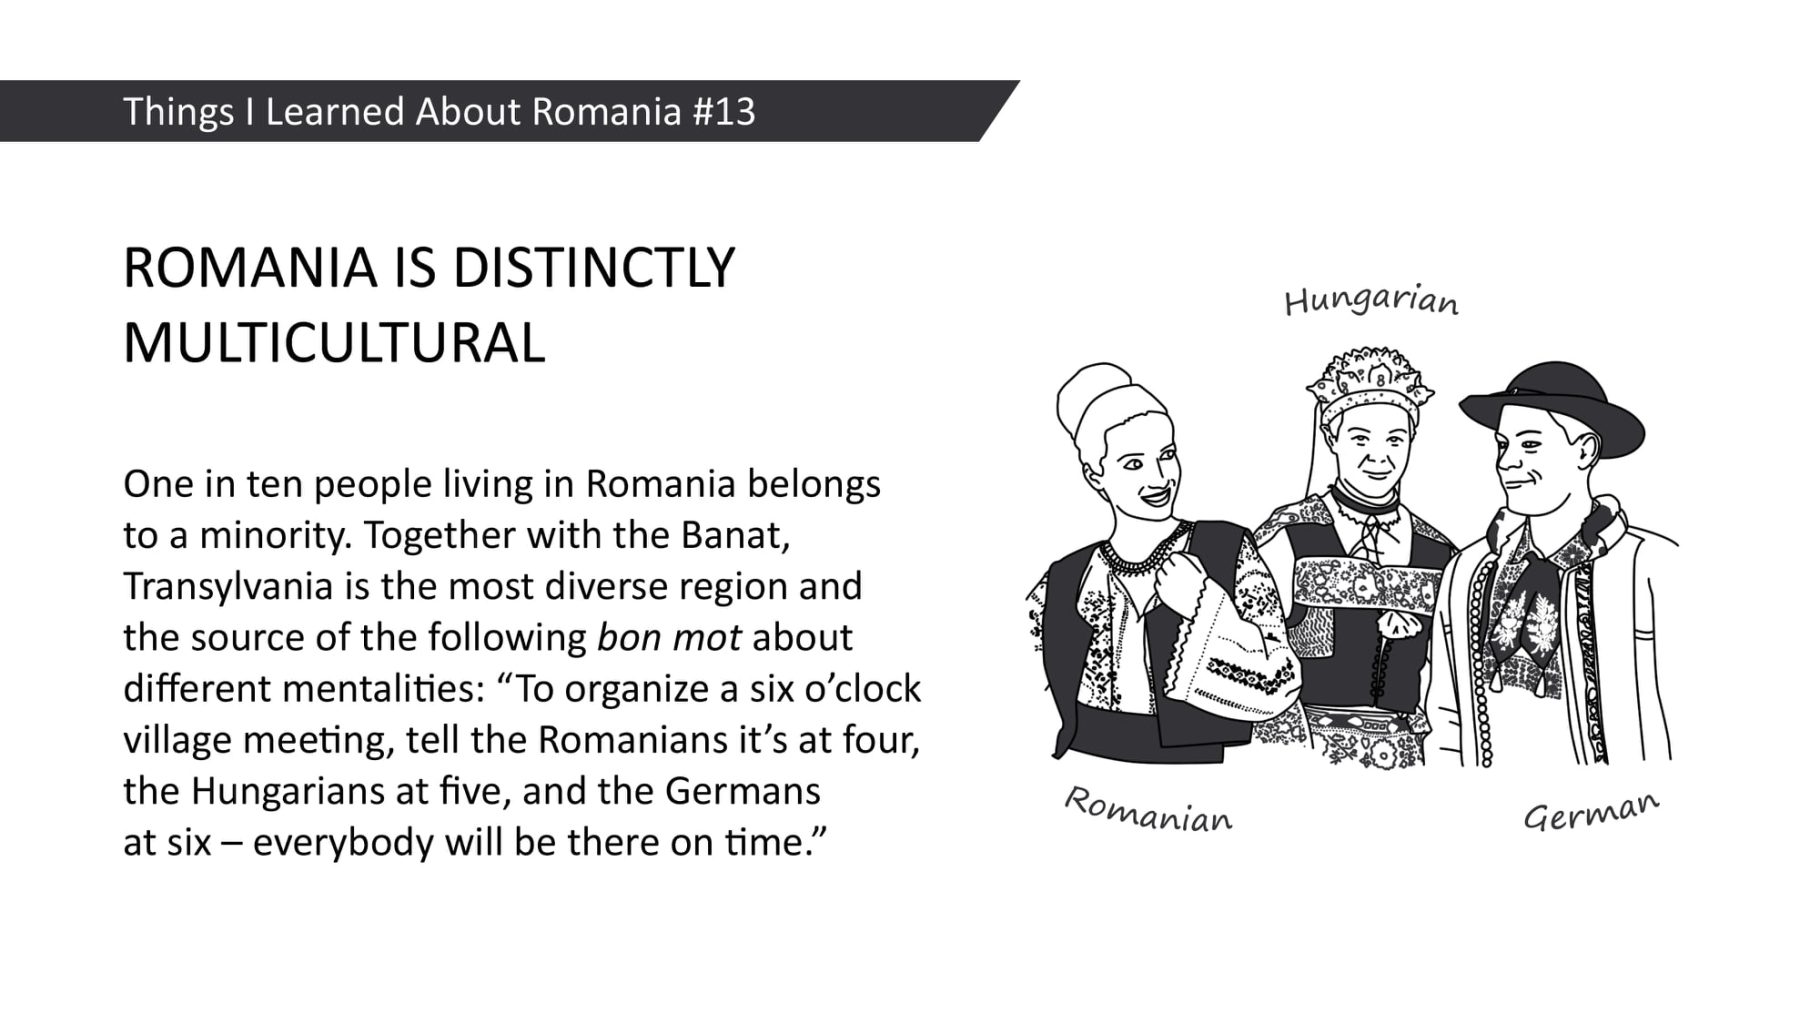 ROMANIA IS DISTINCTLY MULTICULTURAL: One in ten people living in Romania belongs to a minority. Together with the Banat, Transylvania is the most diverse region and the source of the following bon mot about different mentalities: "To organize a six o'clock village meeting, tell the Romanians it's at four, the Hungarians at five, and the Germans at six - everybody will be there on time.